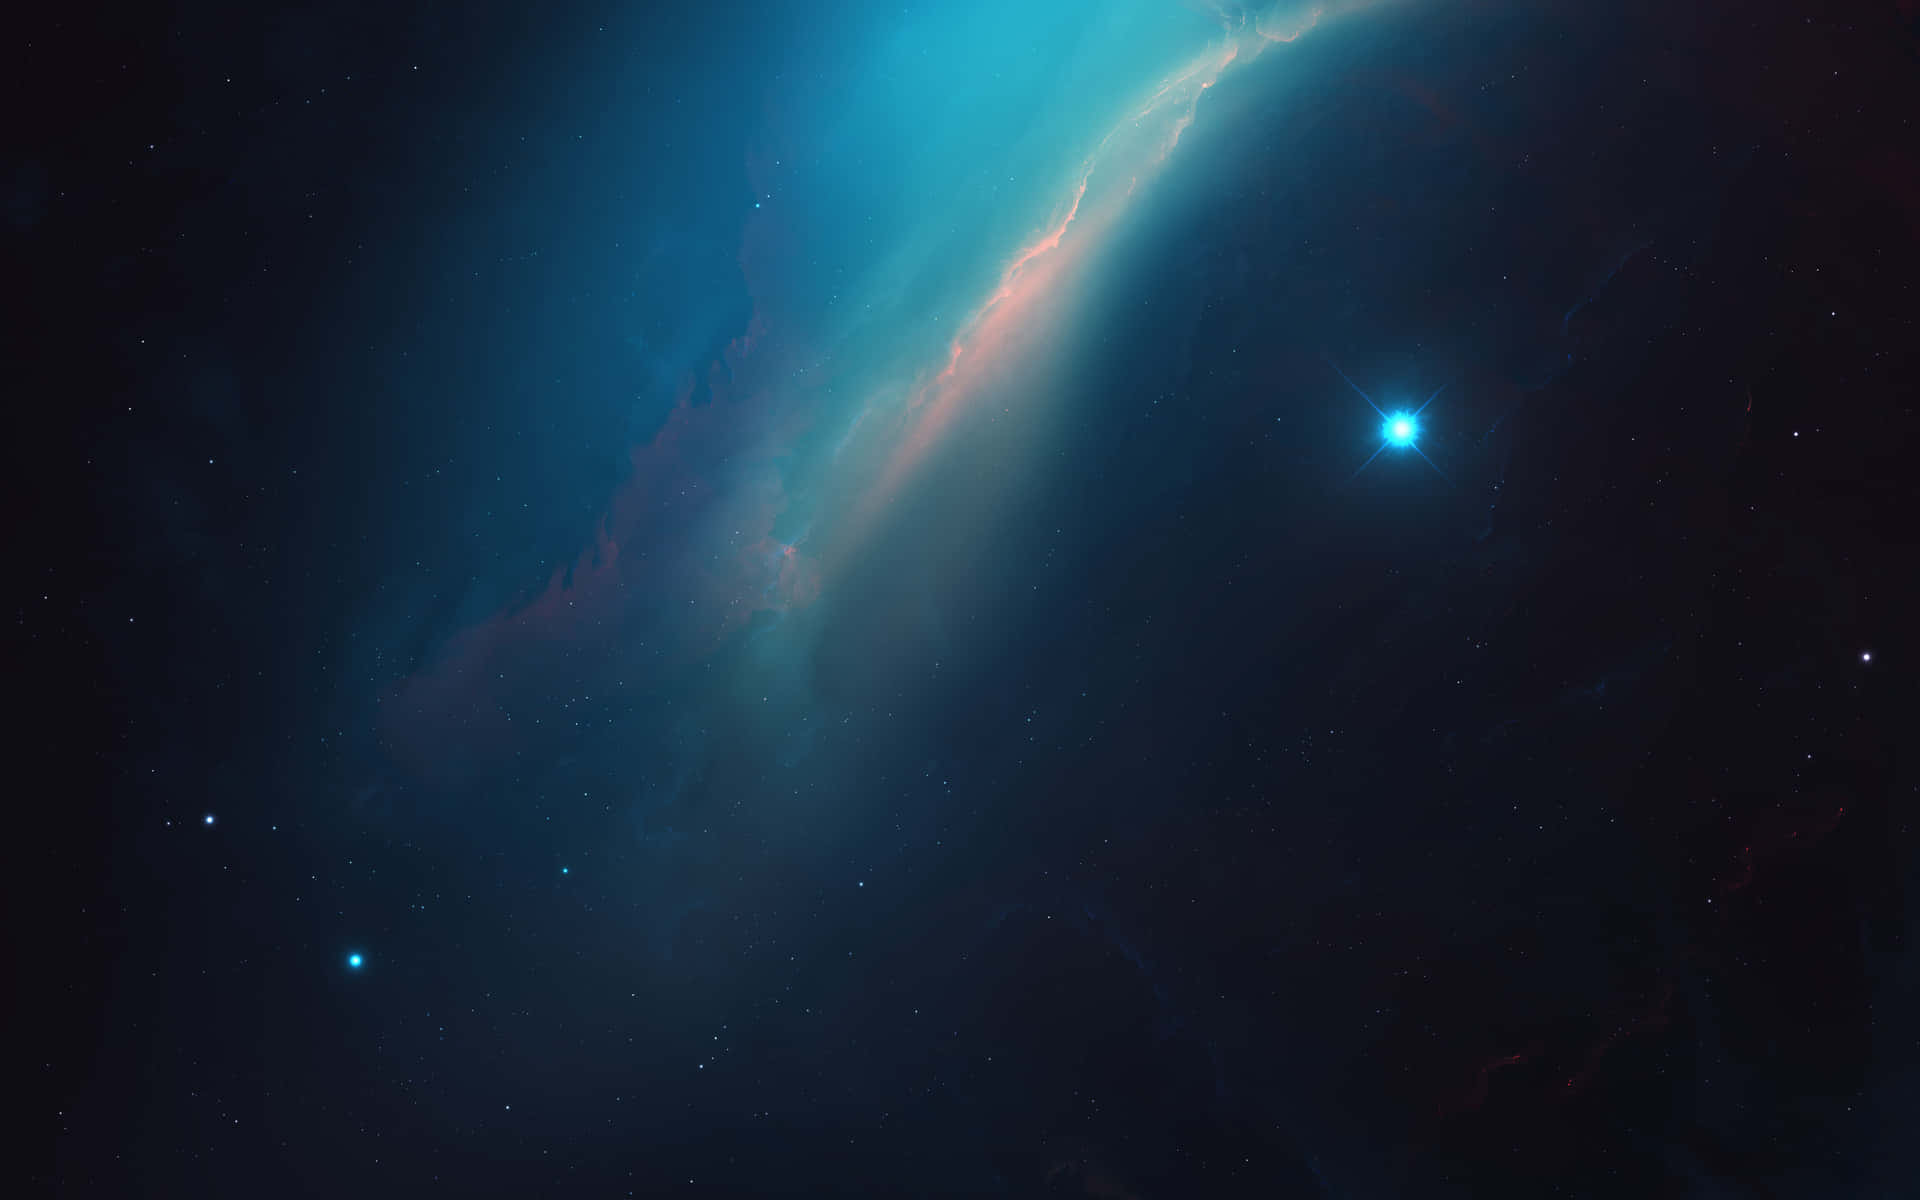 Explore the Galaxy with 8K Space Wallpaper